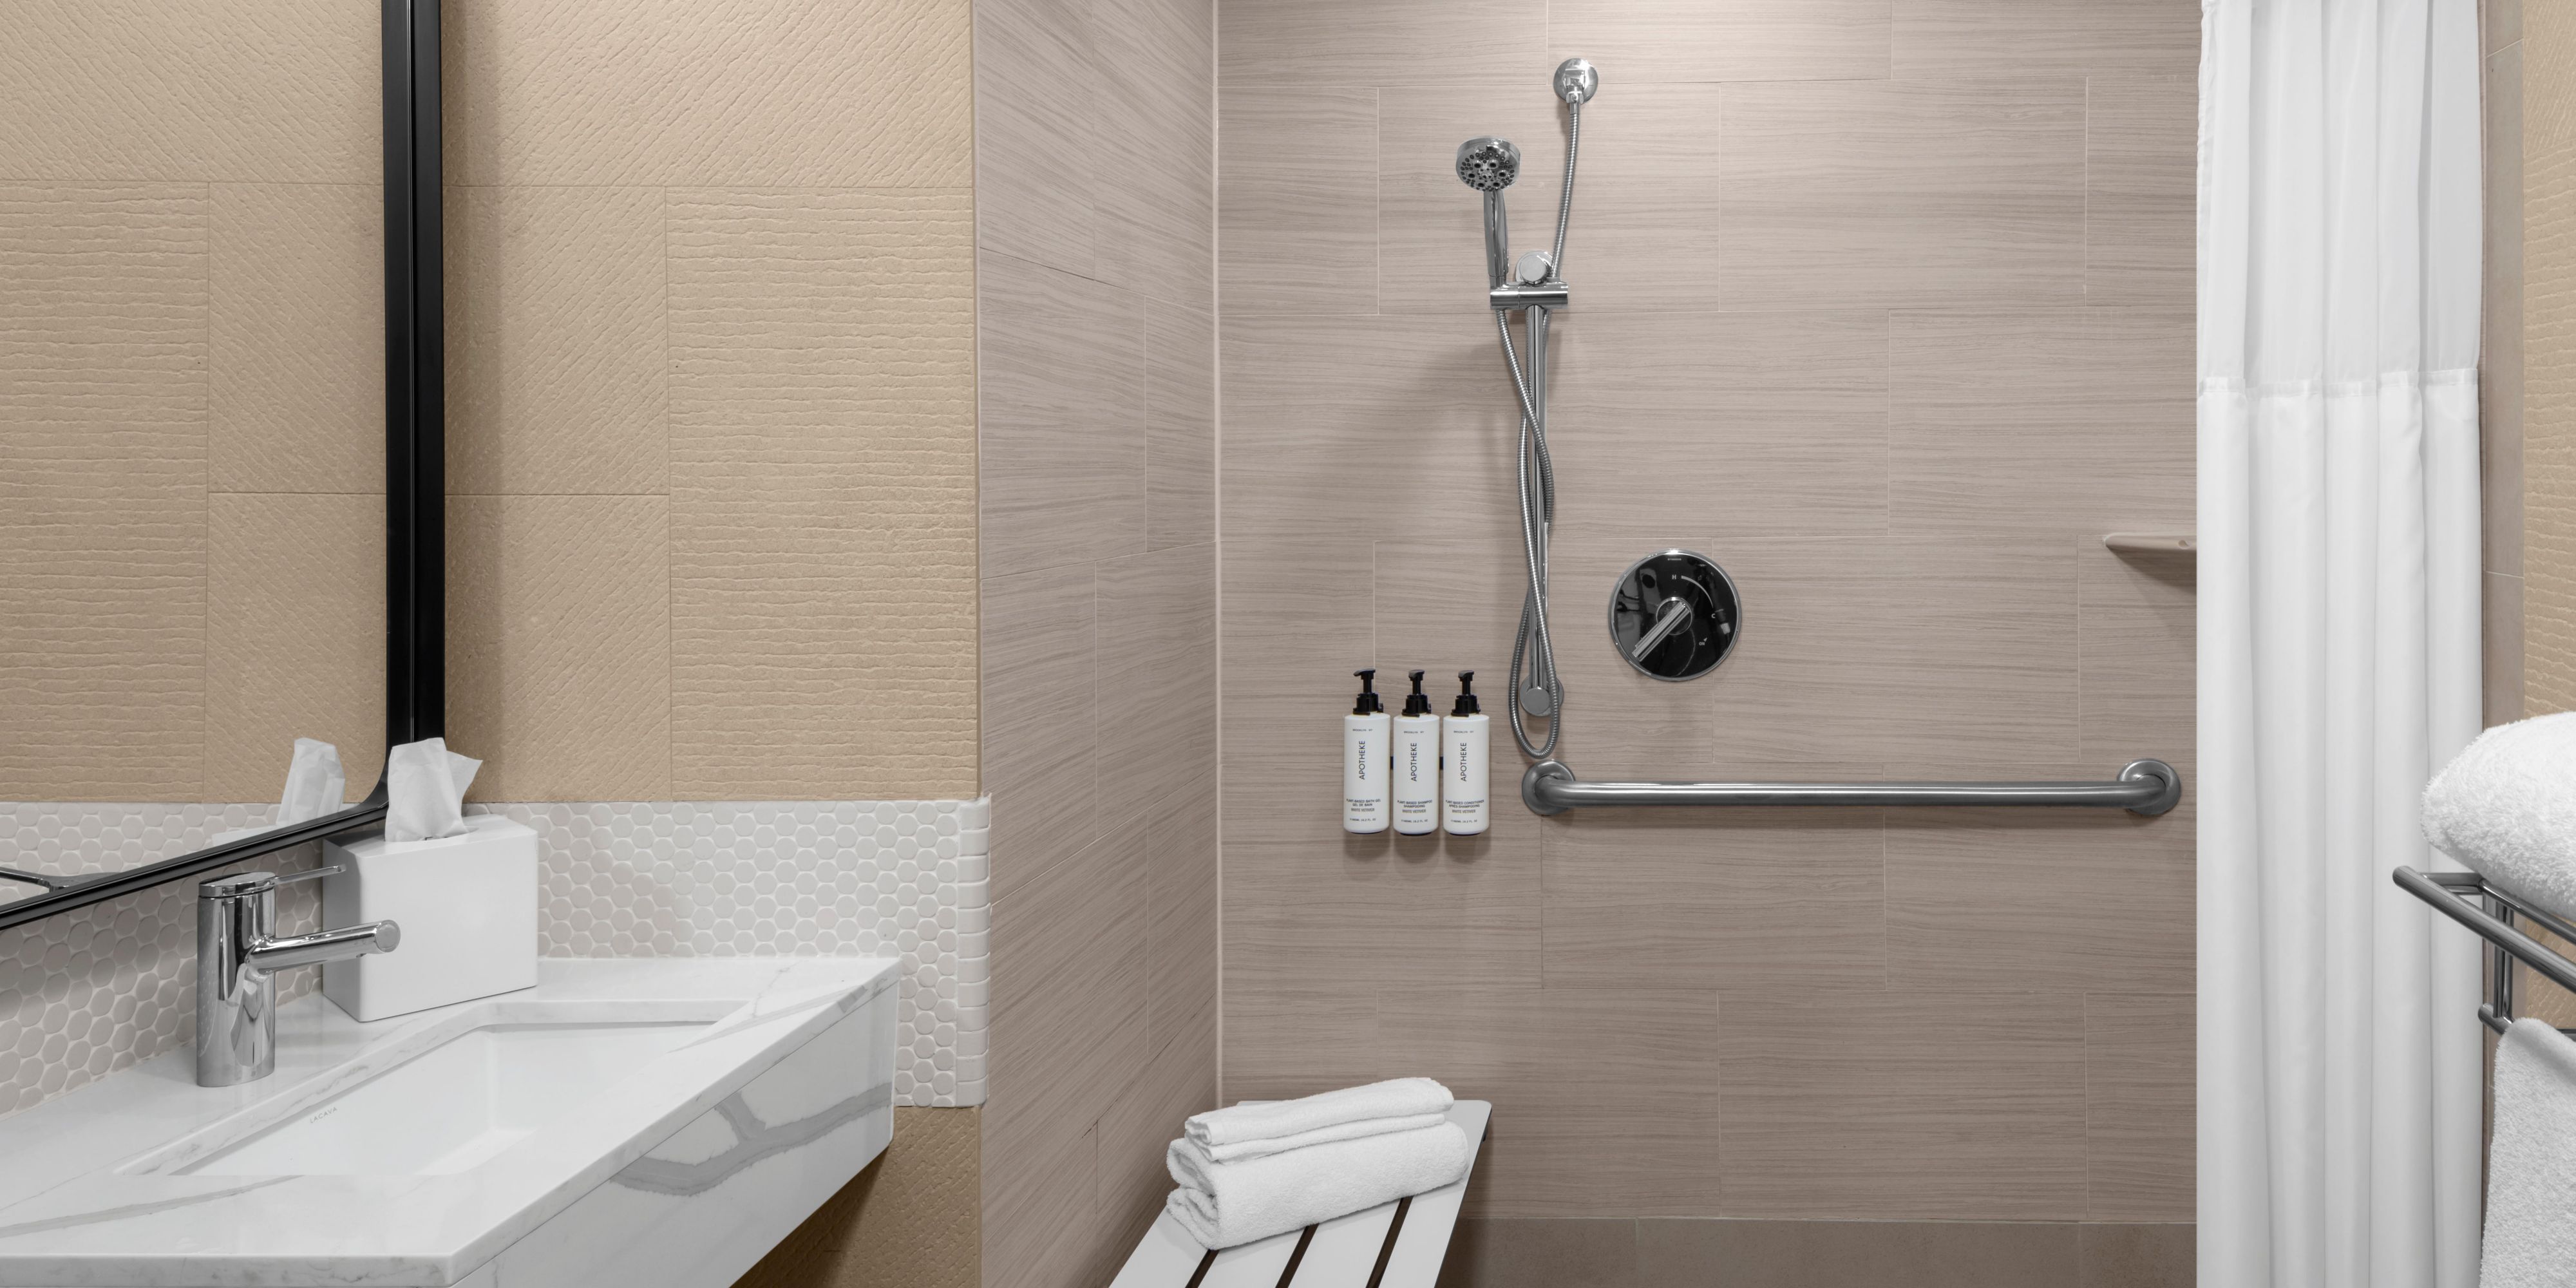 Accessibility features include roll-in shower.